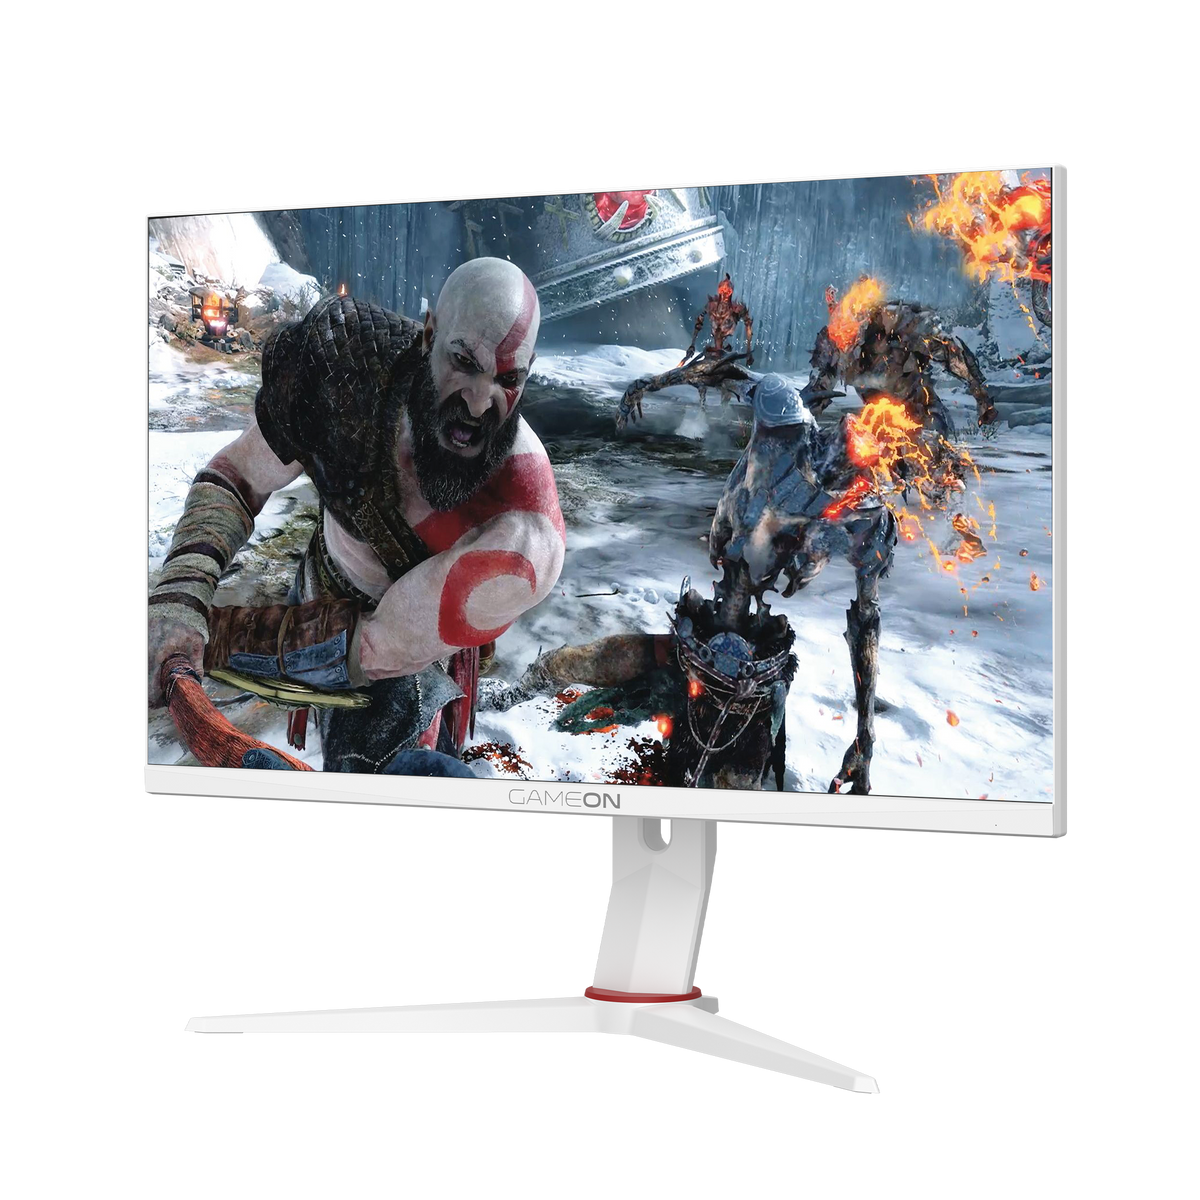 GAMEON GOA27FHD360IPS Artic Pro Series 27" FHD, 360Hz, MPRT 0.5ms, HDMI 2.1, Fast IPS Gaming Monitor (Support PS5) - White